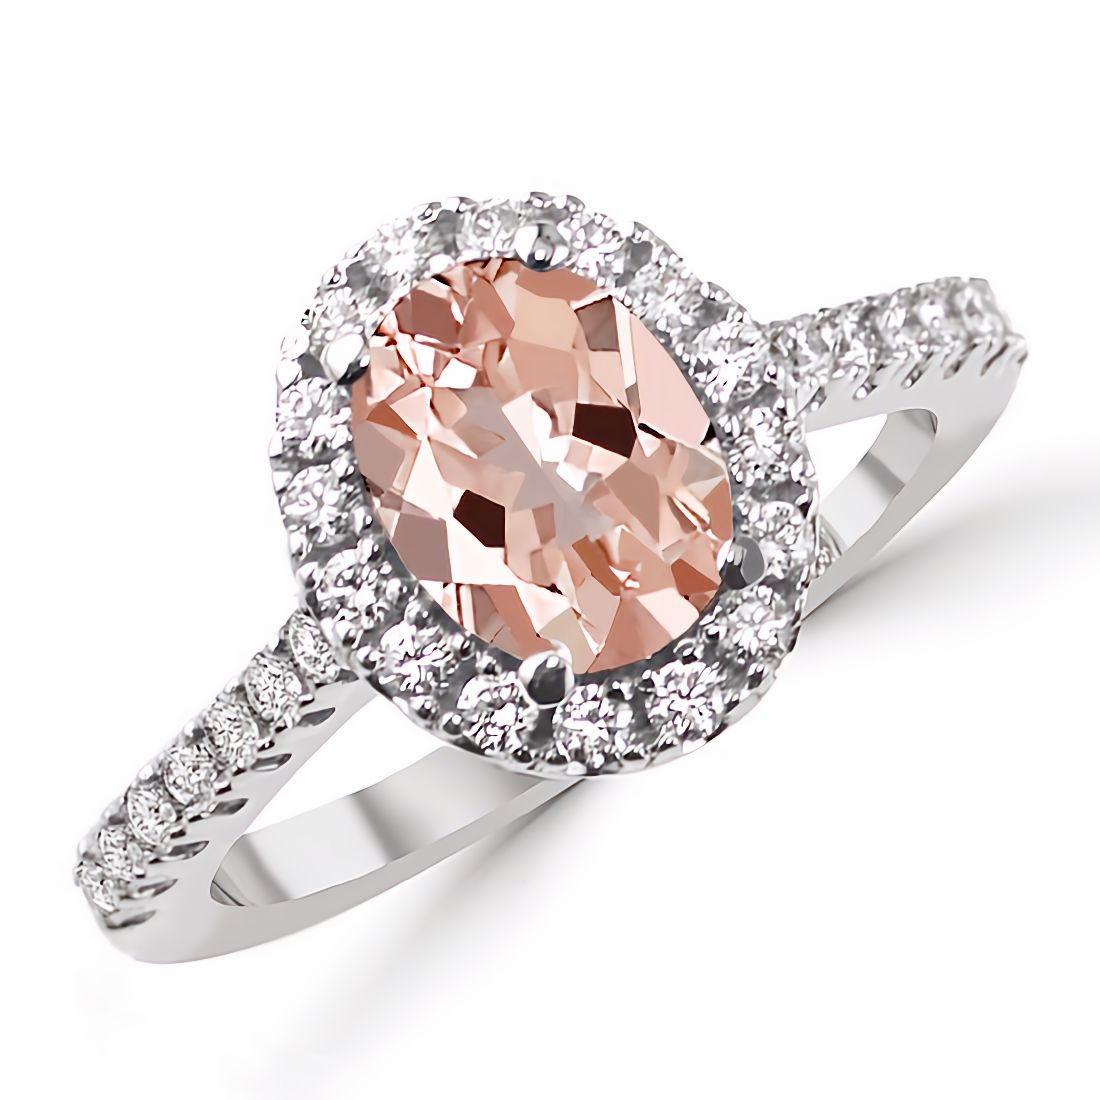 Haydee Oval Halo with Pink Morganite Engagement Ring in Gold 8x6 Natural Pink Morganite / 14kt White Gold / Sizes 4-9 Message US Your Finger Size